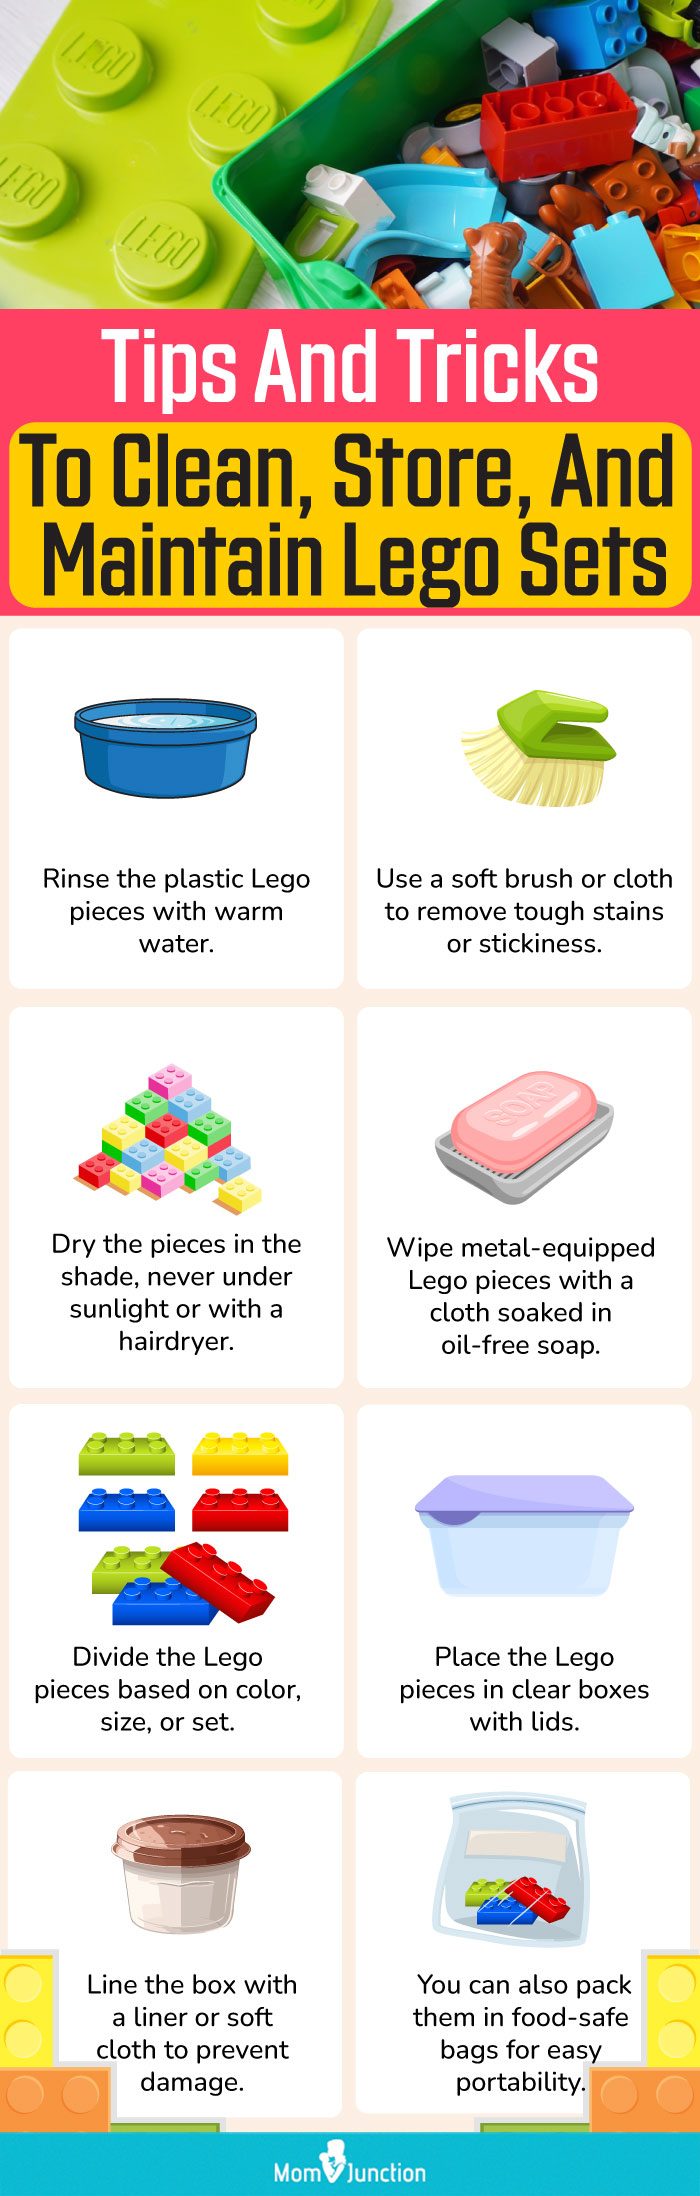 Tips And Tricks To Clean, Store, And Maintain Lego Sets (infographic)